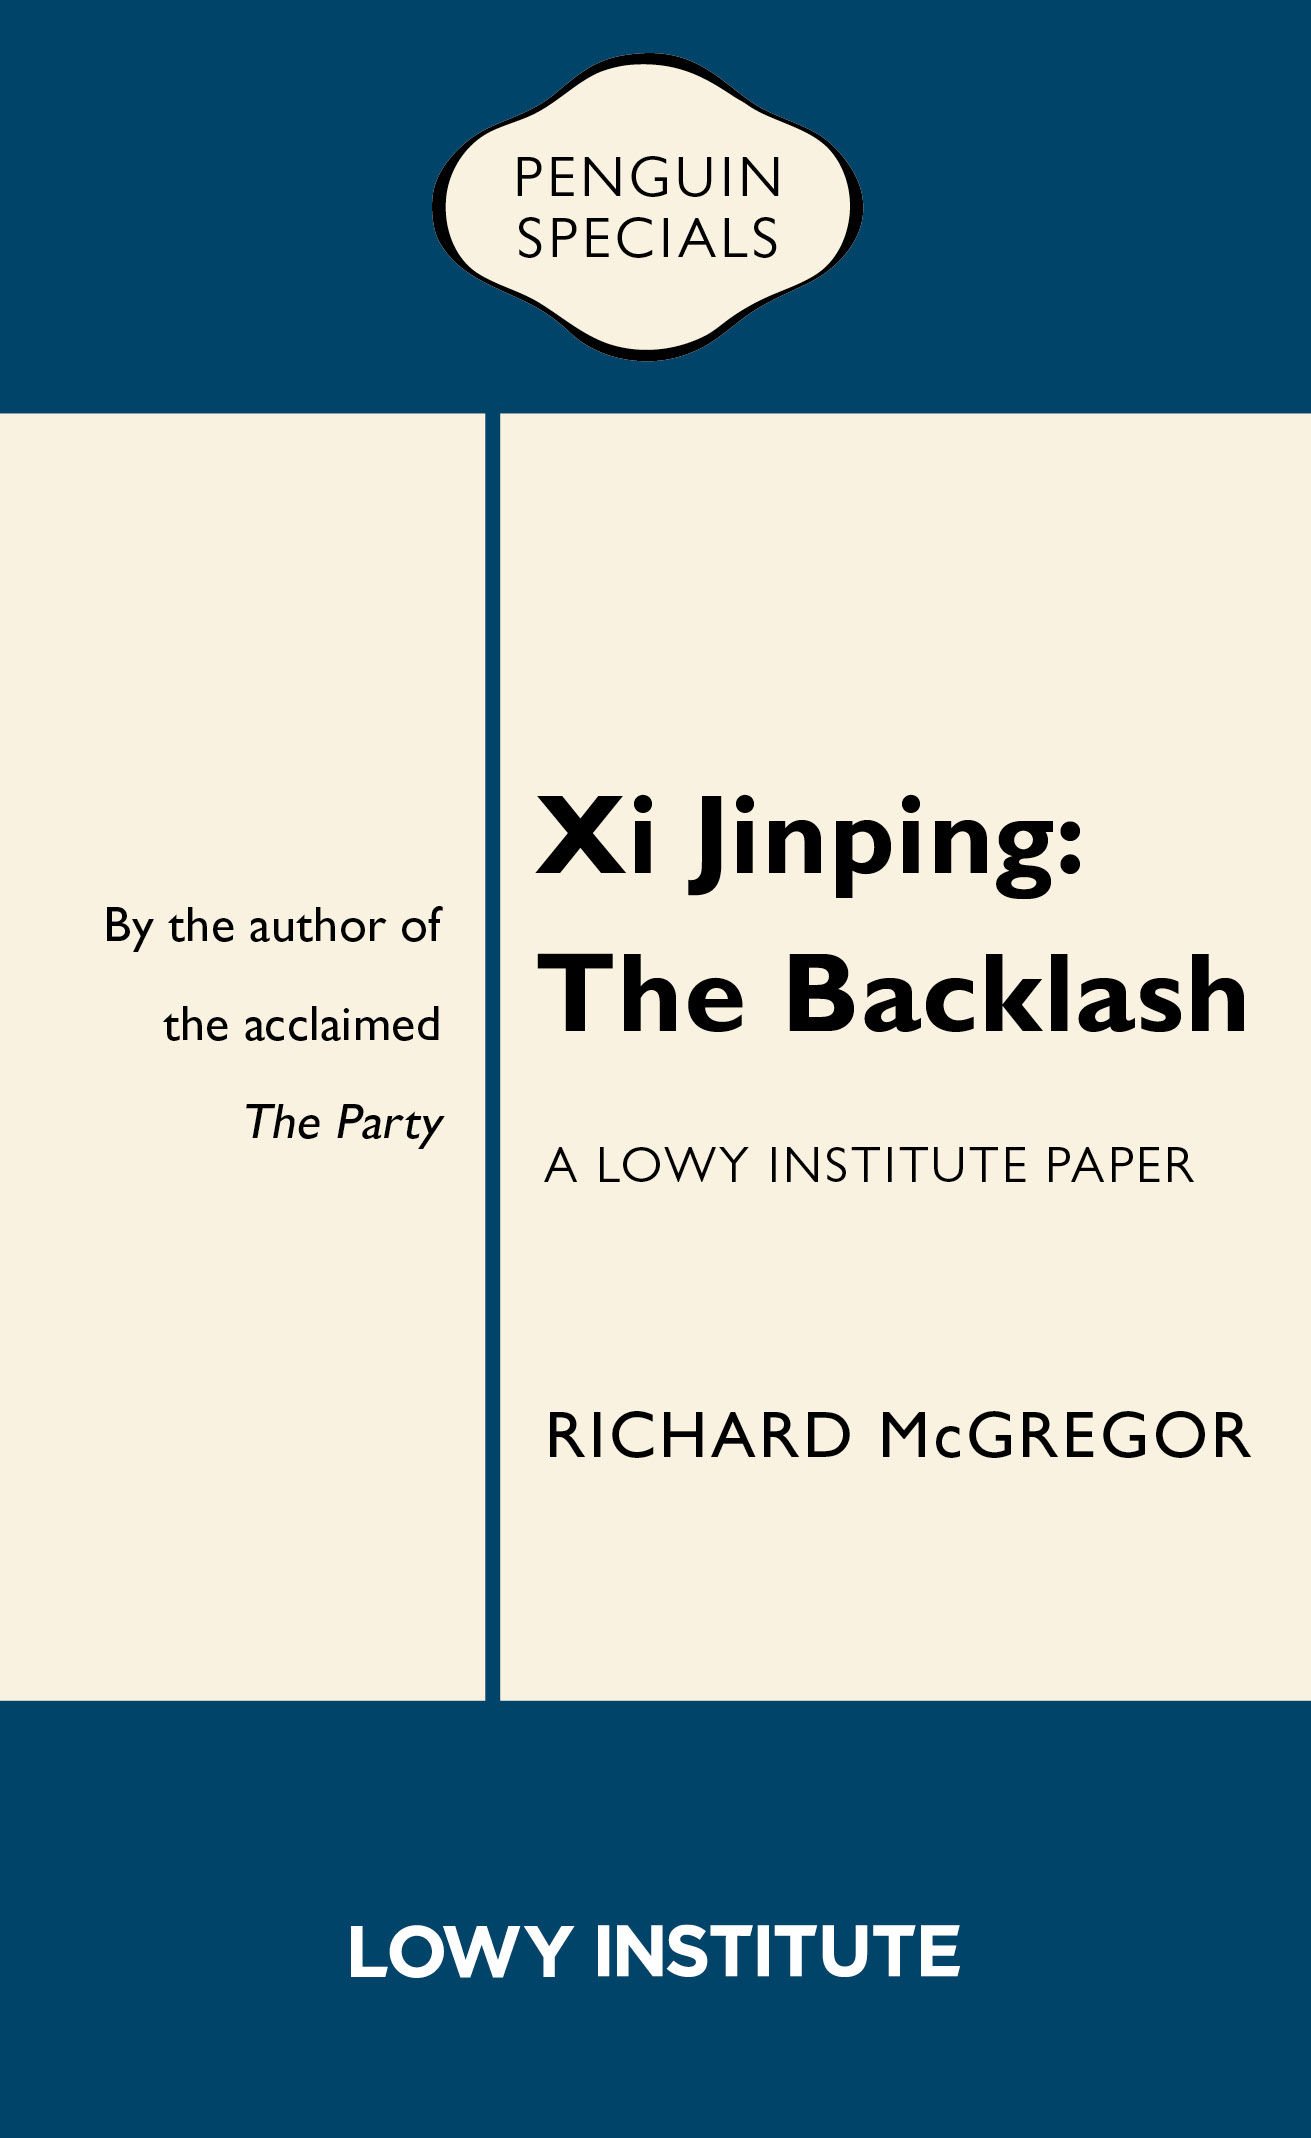 Xi Jinping: The Backlash book cover